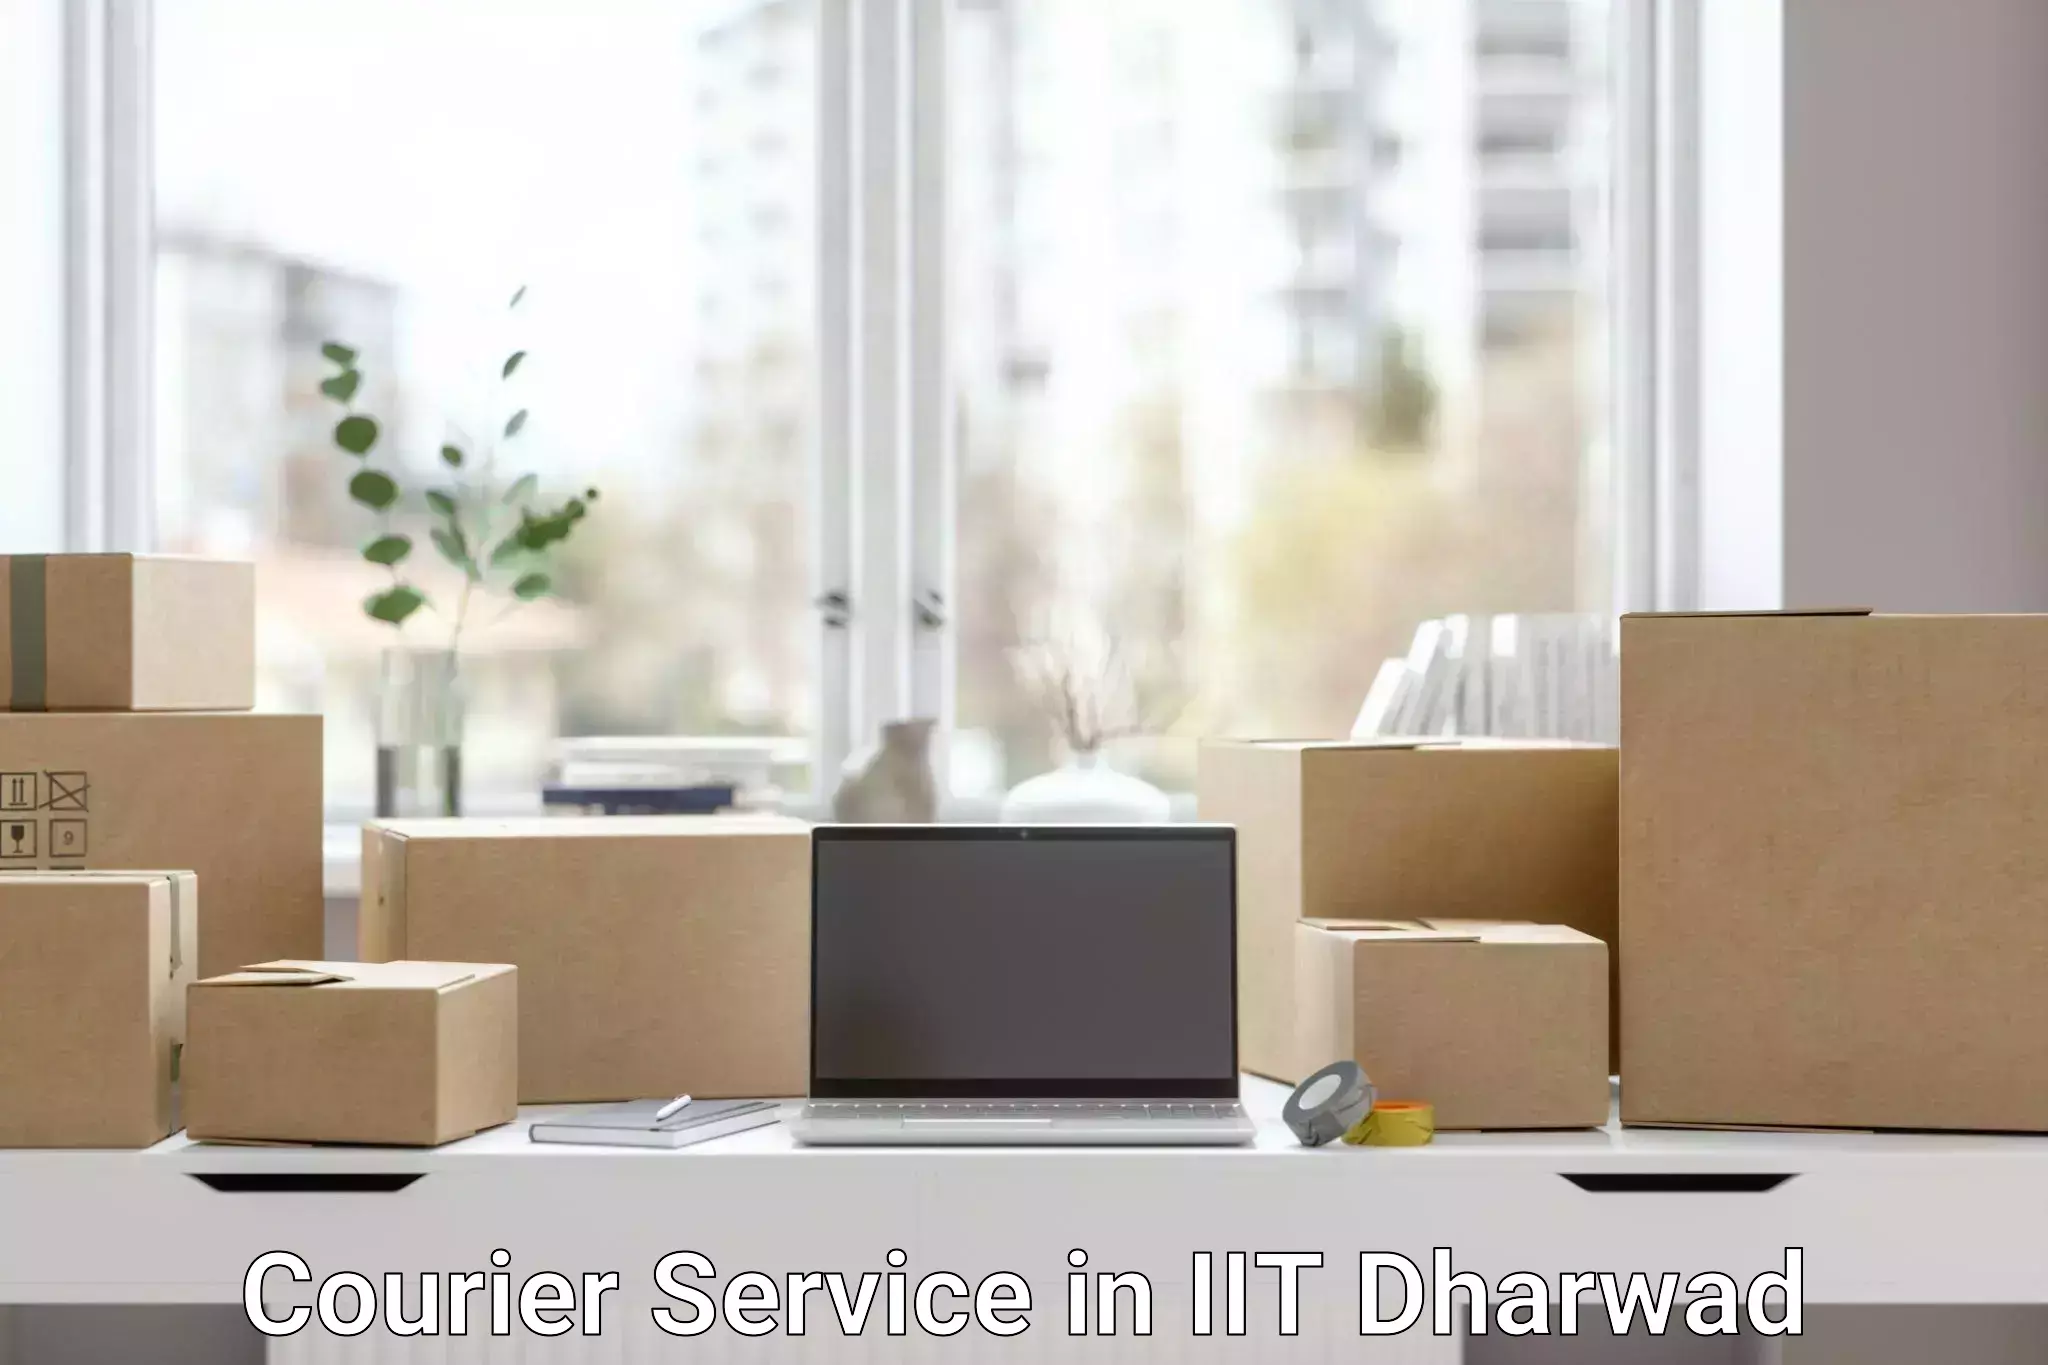 Customer-oriented courier services in IIT Dharwad